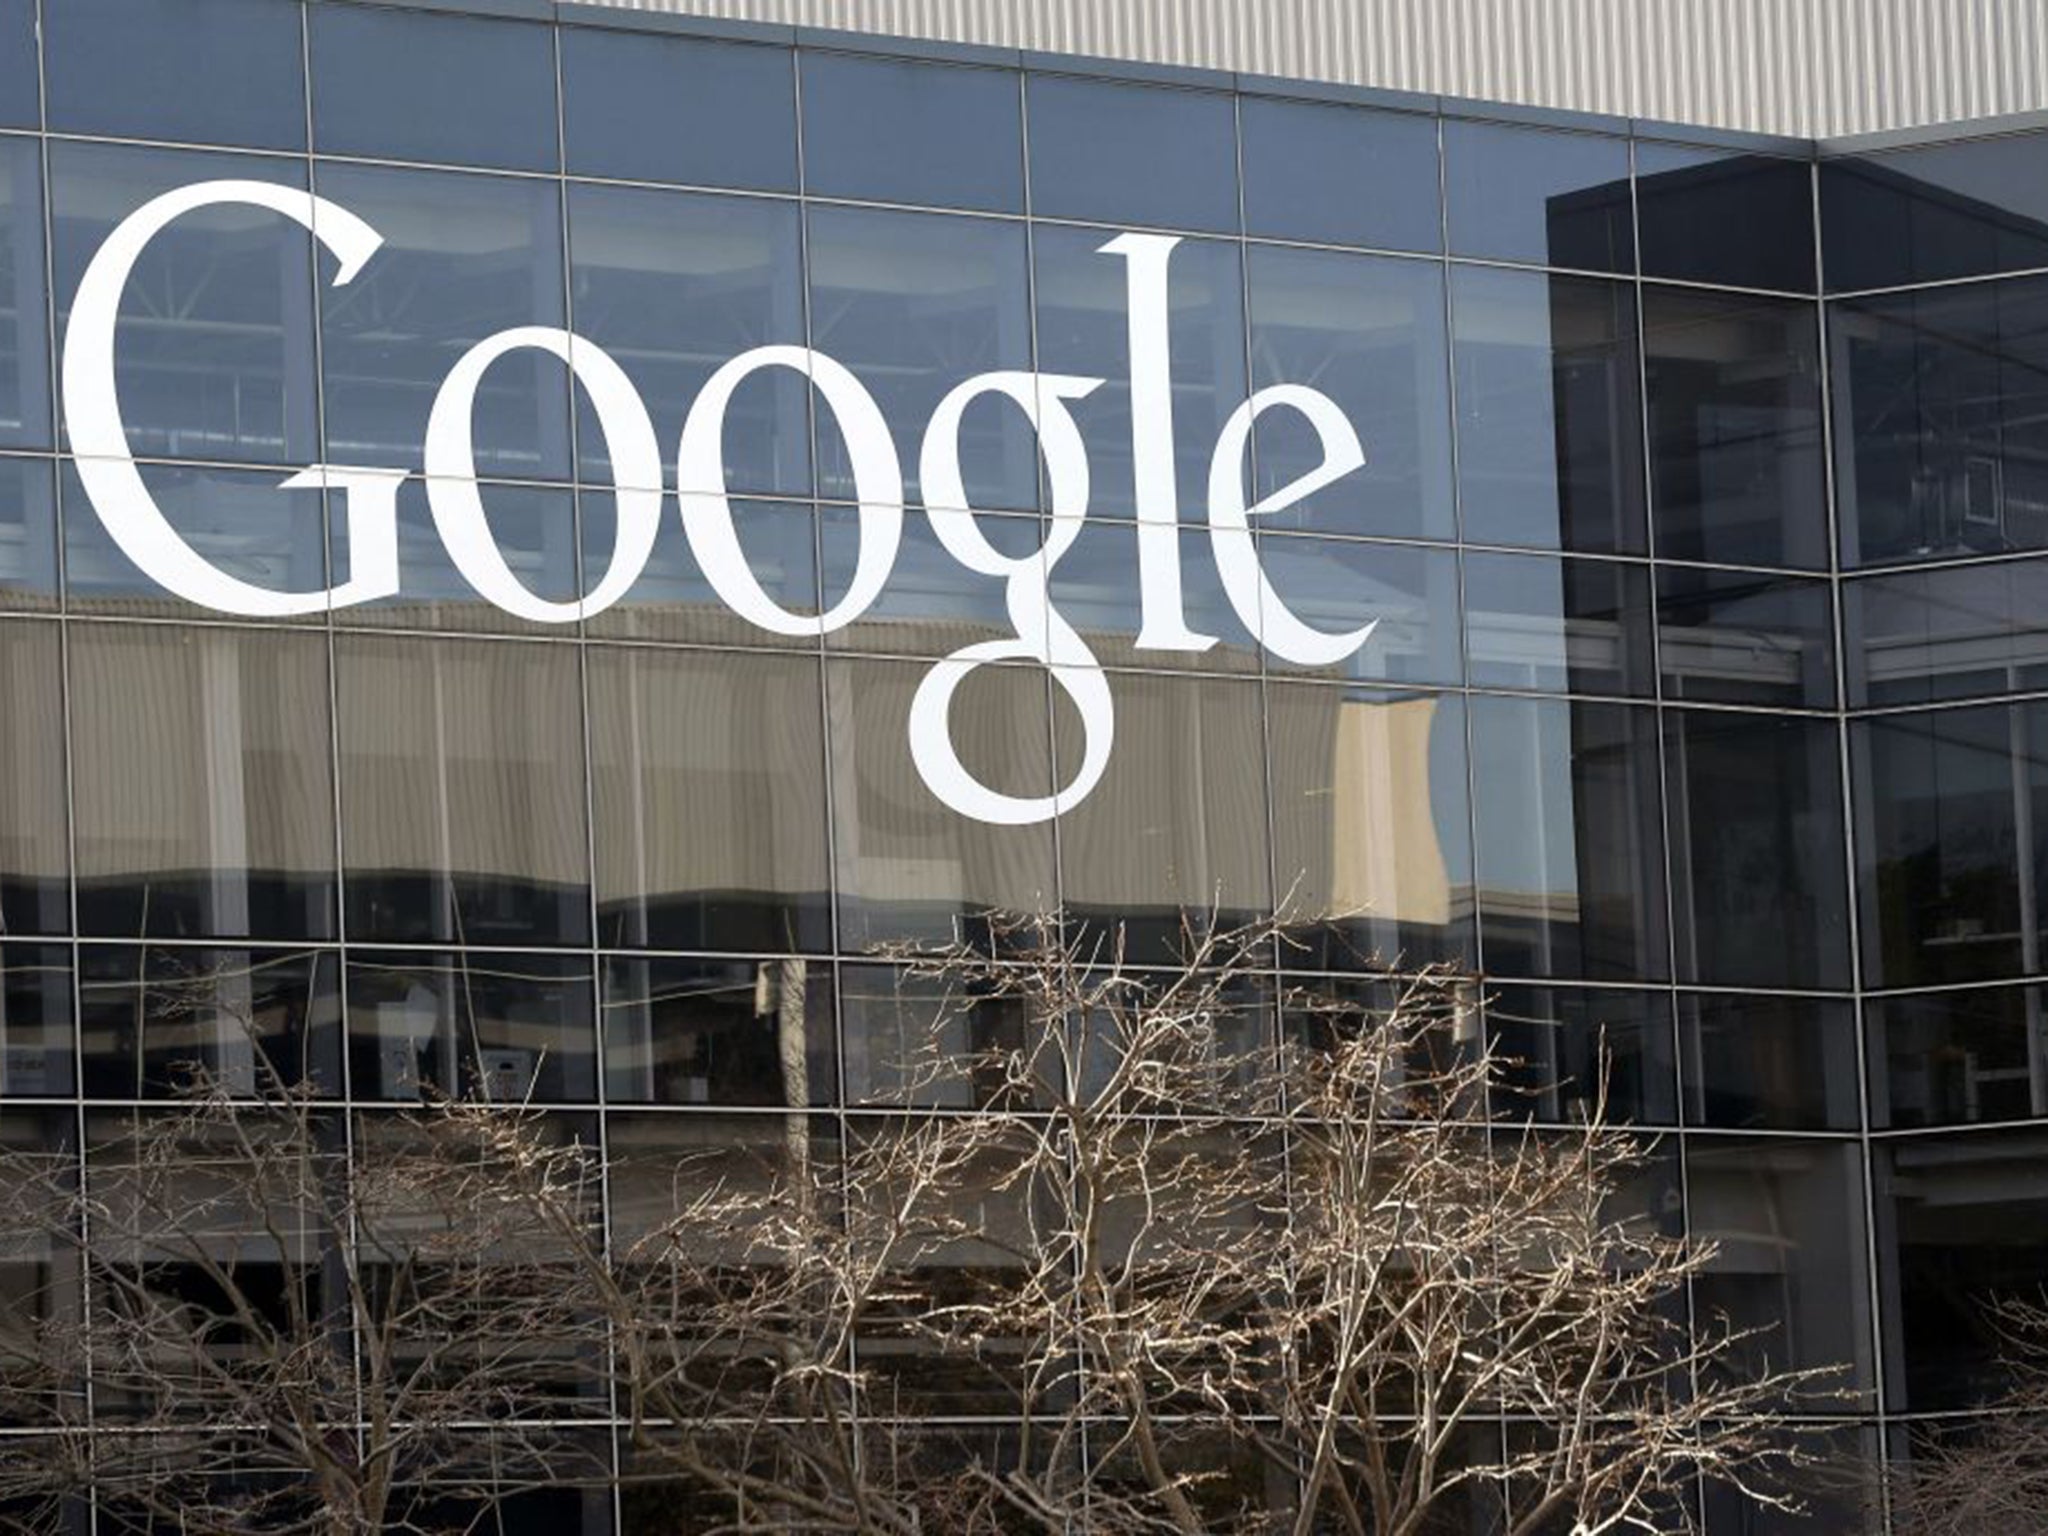 Google agreed to pay £130m of unpaid taxes over 10 years